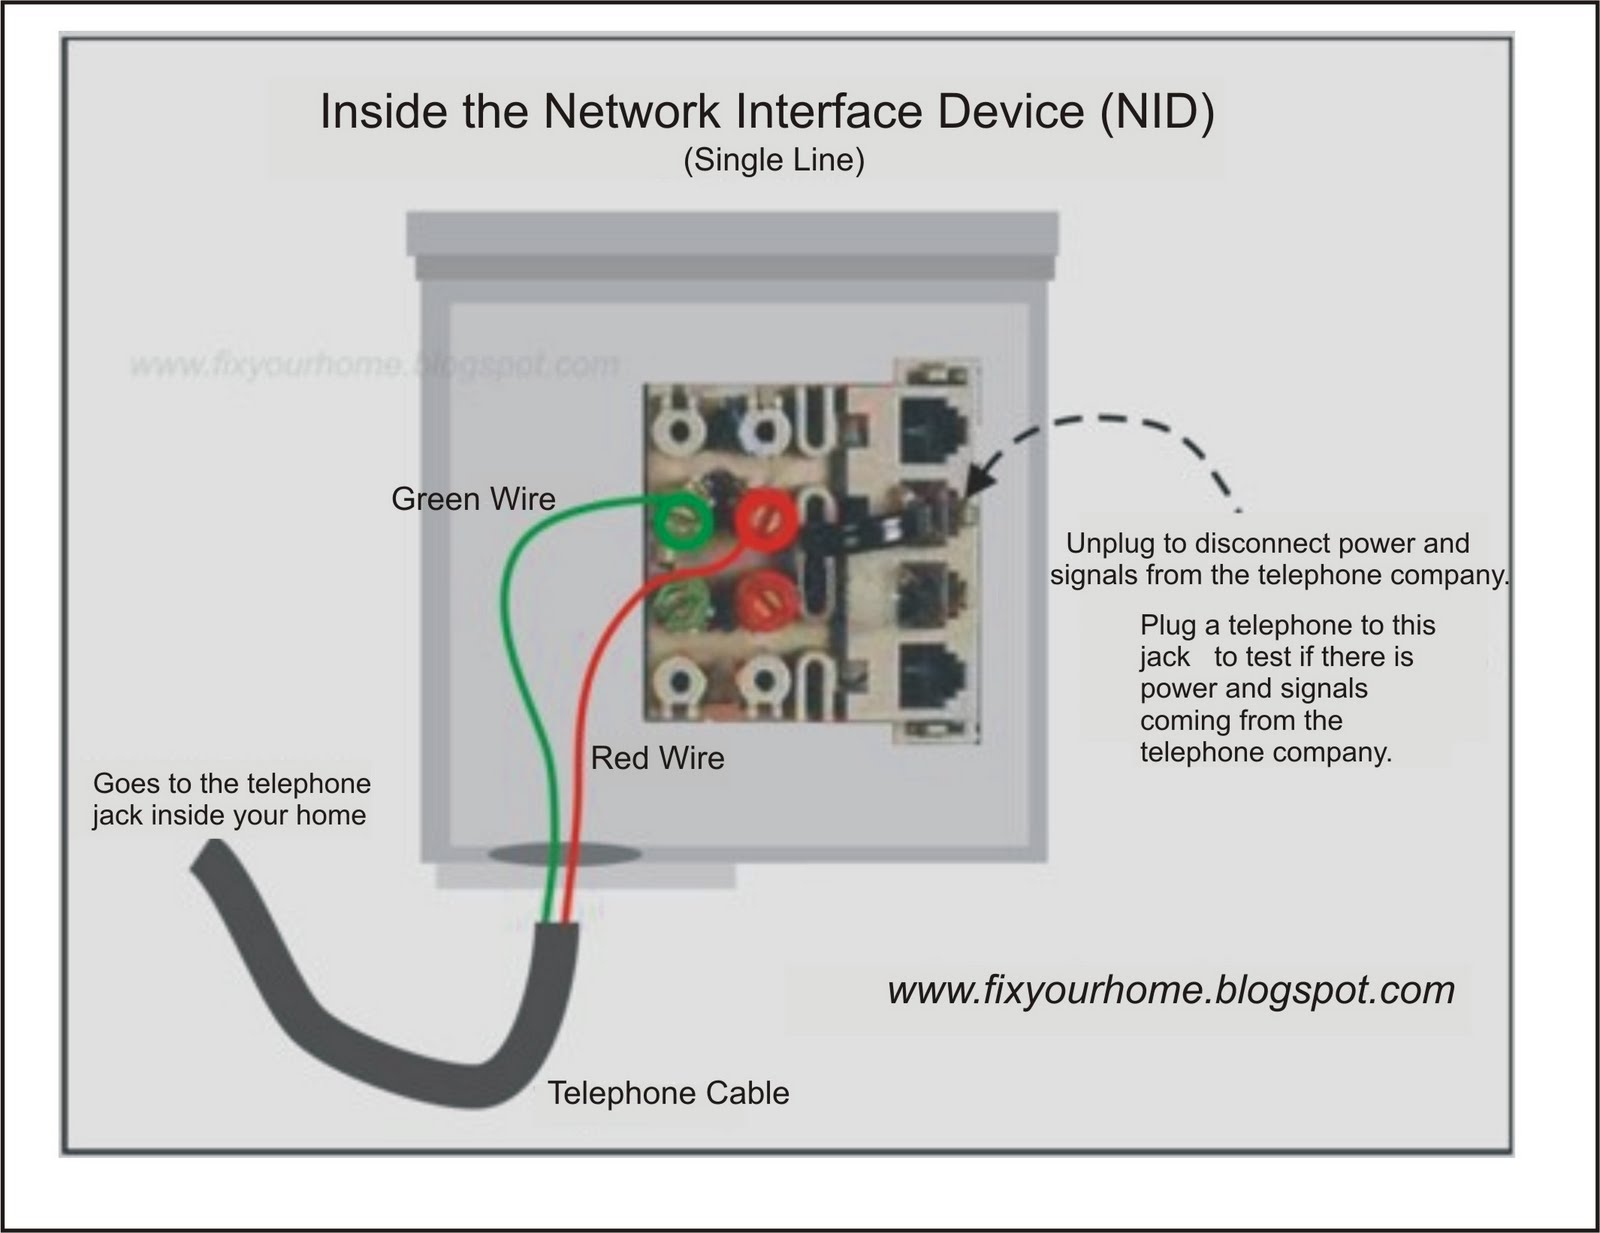 Fix Your Home: Telephone Network Interface Device (NID)